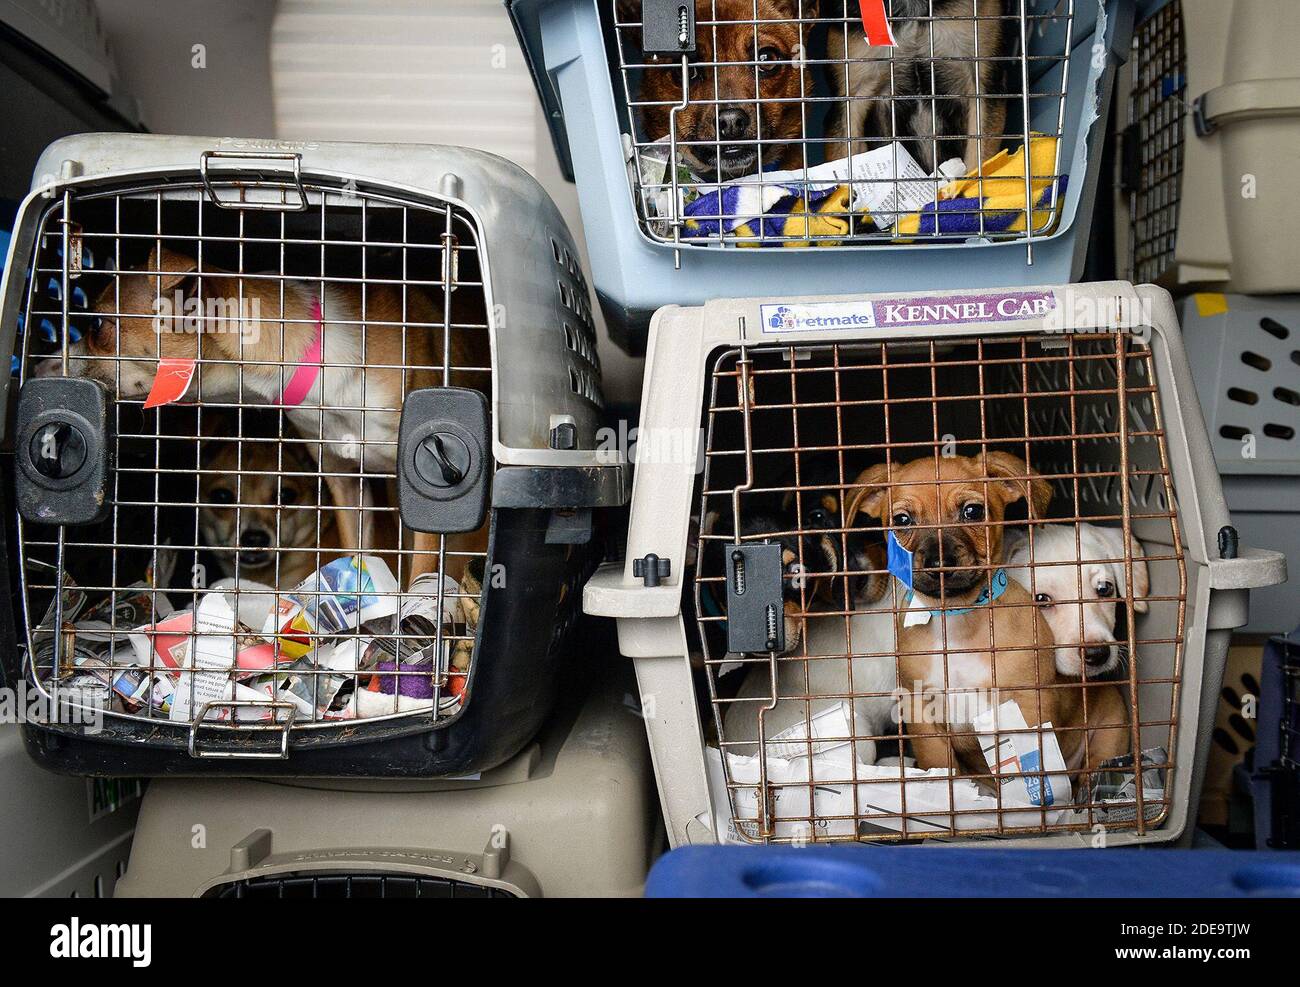 NO FILM, NO VIDEO, NO TV, NO DOCUMENTARY - Crates with small breed shelter  dogs are stacked up inside the cargo area of a Pilatus TC12 turbo prop  plane to be transported